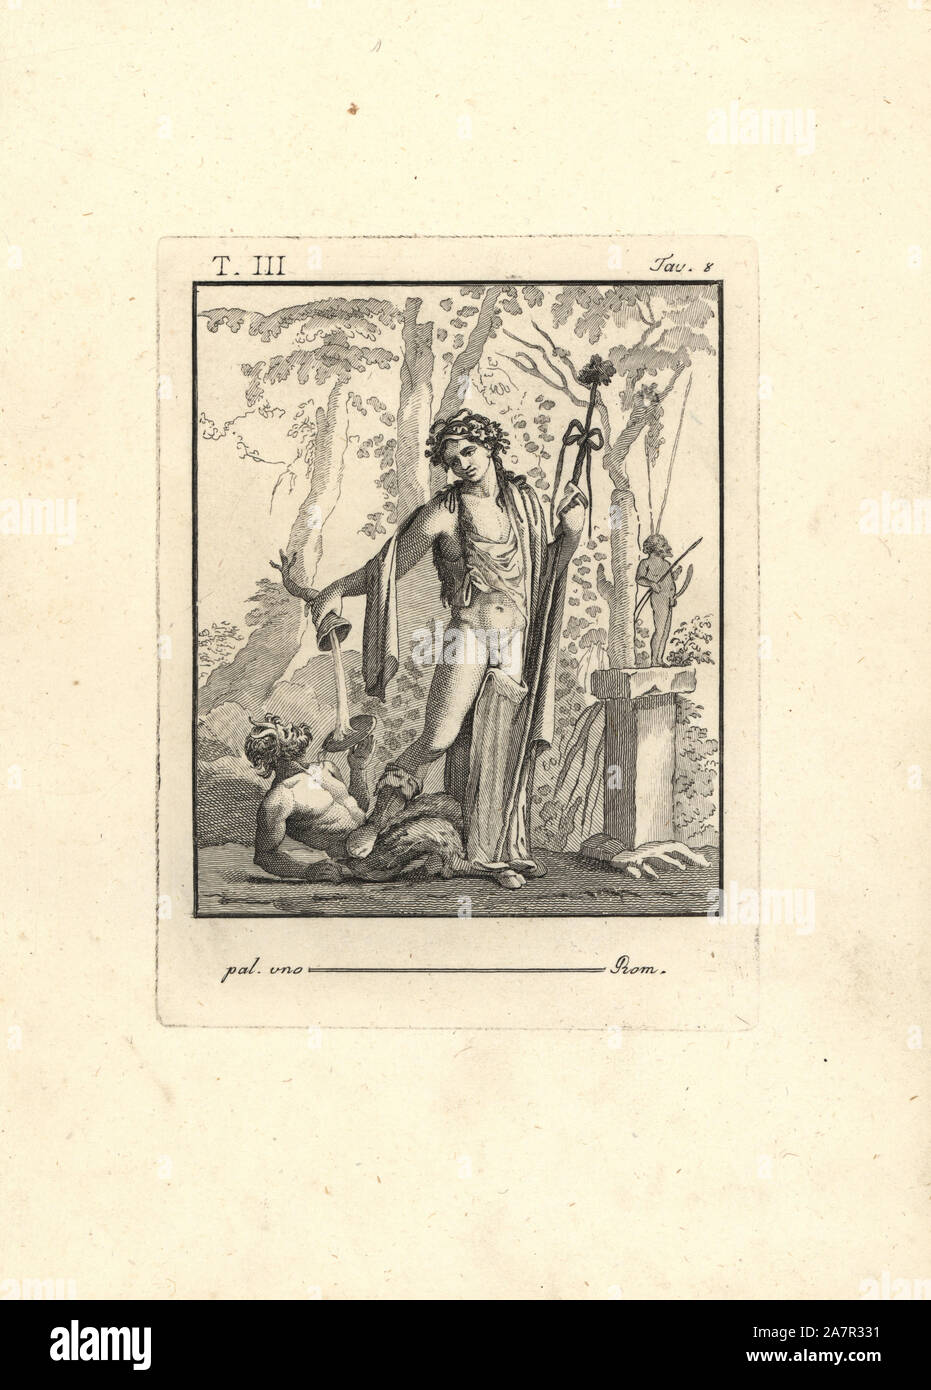 Bacchus with thyrsus, tripod horn and crown of leaves standing in a forest. He stands on a drunken satyr in front of a statue of Priapus. Copperplate engraving by Tommaso Piroli from his Antiquities of Herculaneum (Antichita di Ercolano), Rome, 1790. Stock Photo